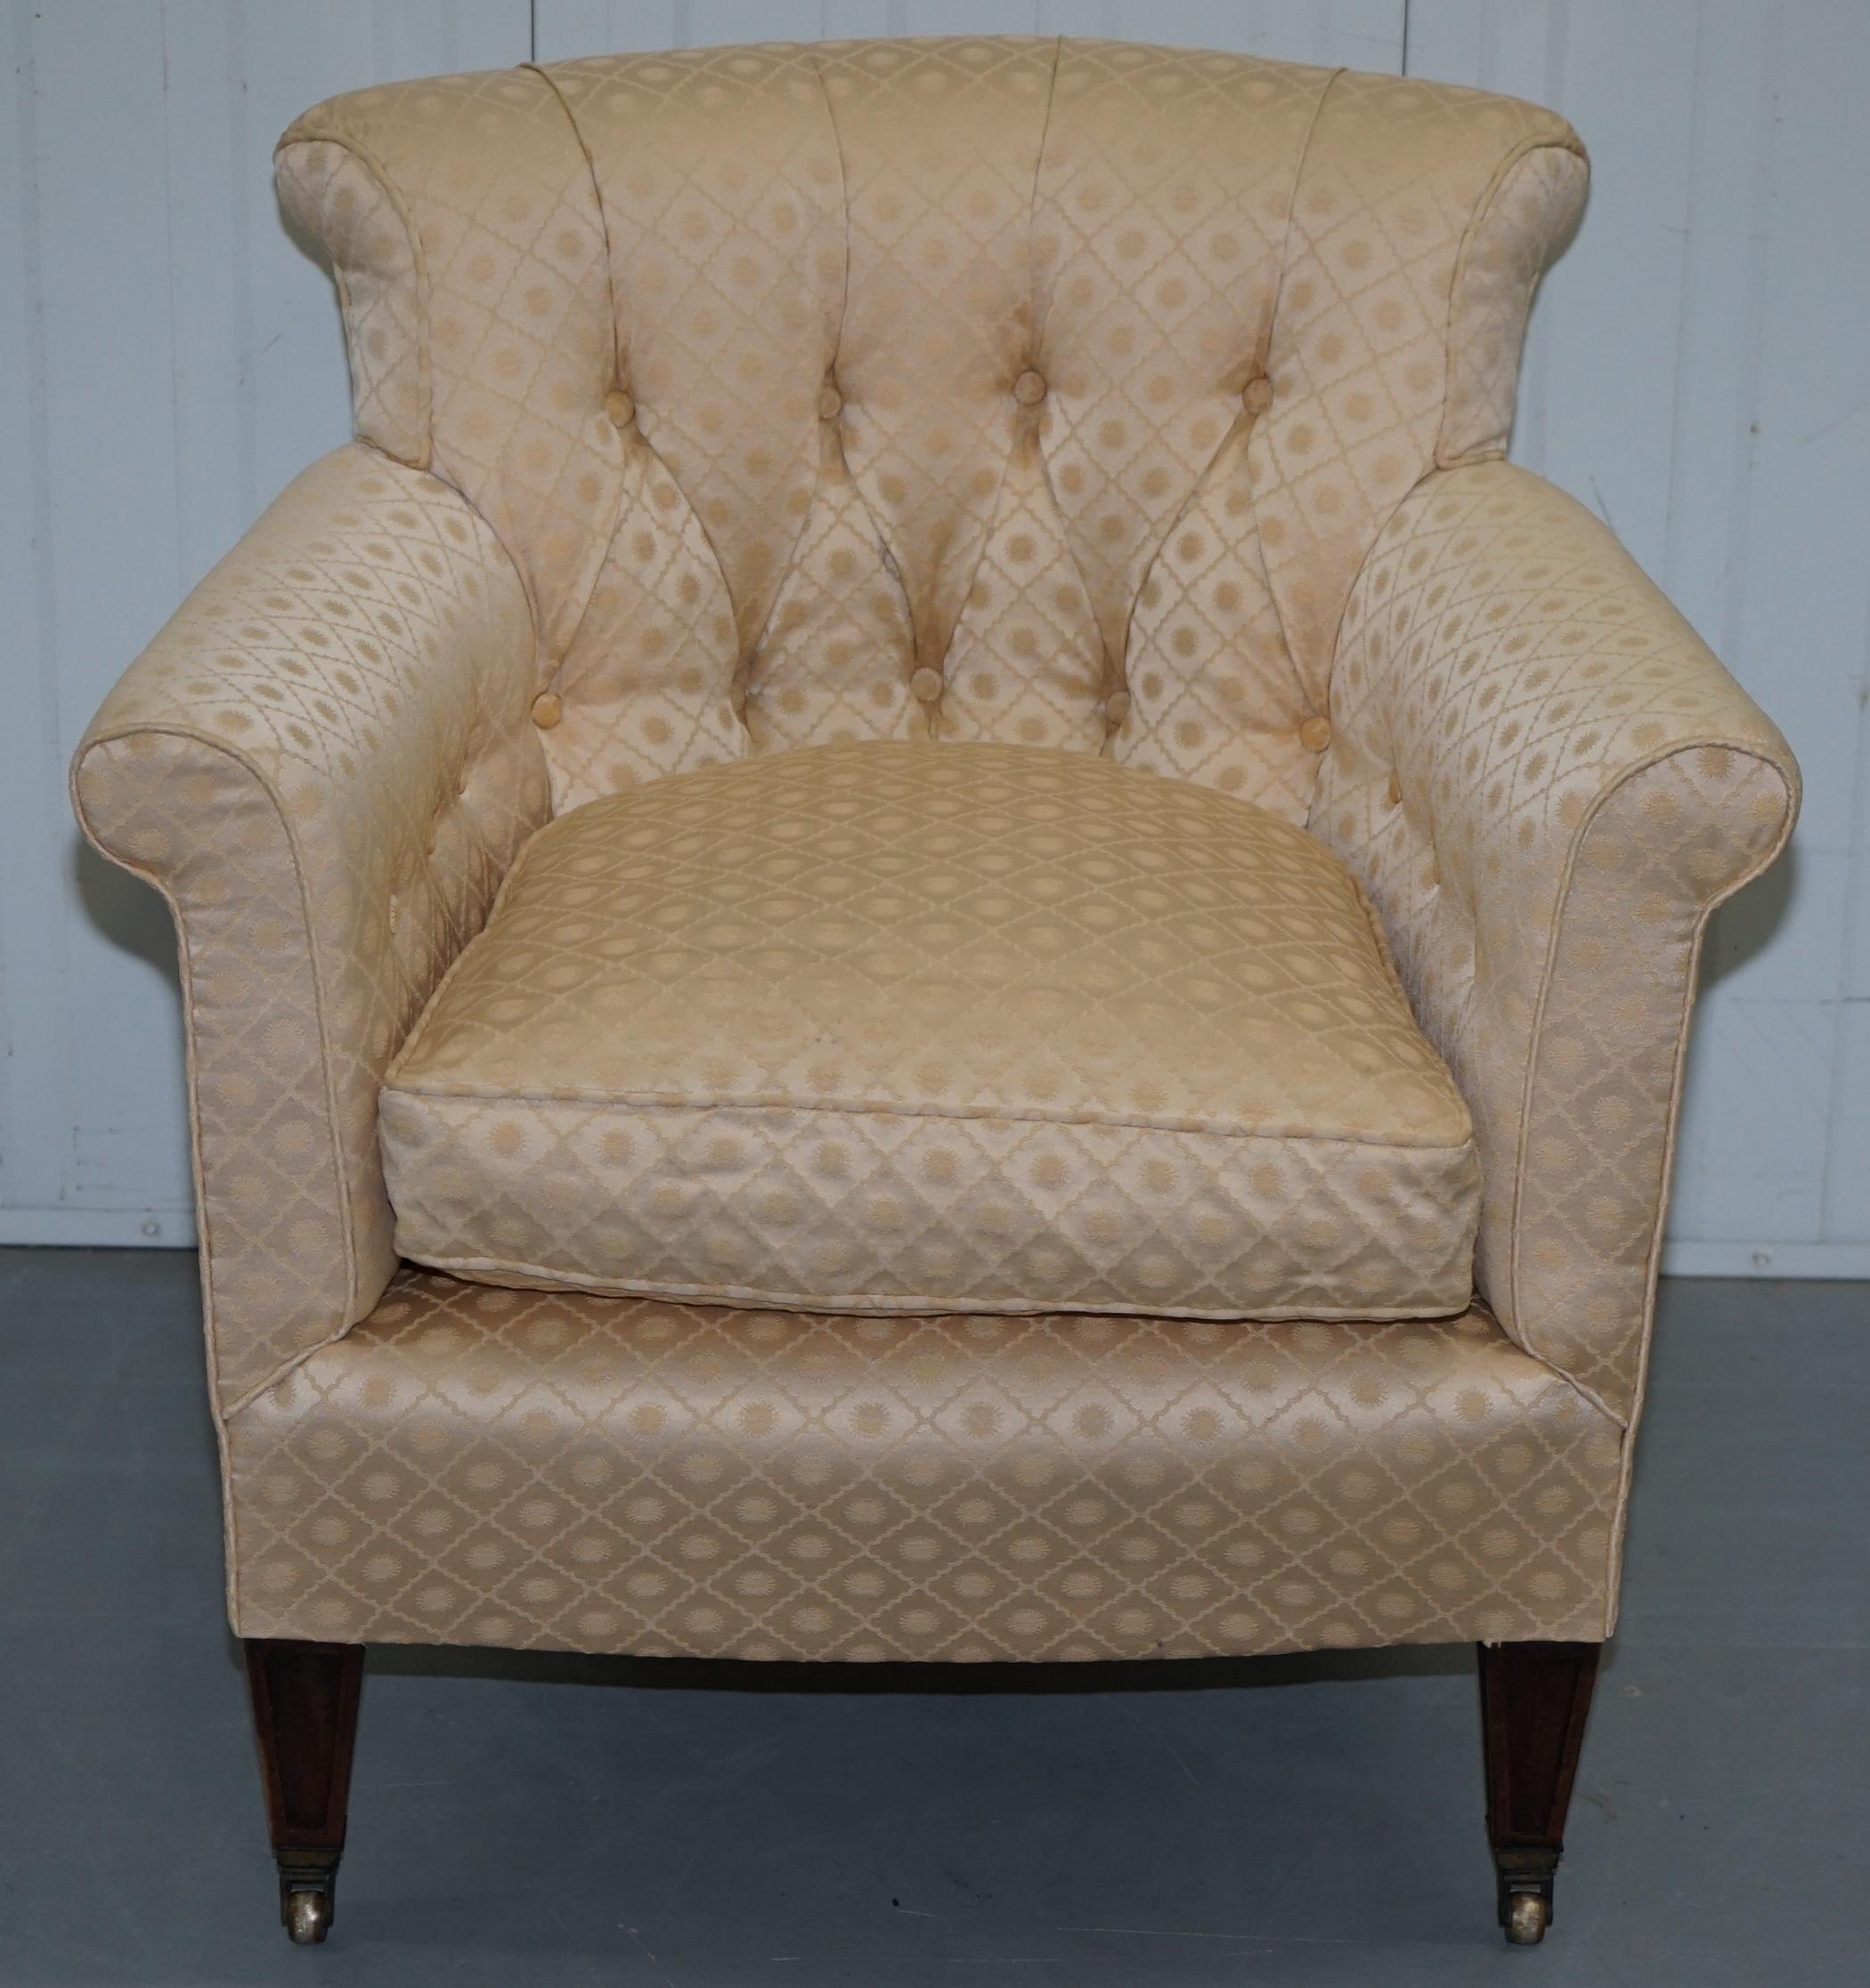 We are delighted to offer for sale this lovely original Victorian Chesterfield buttoned fabric upholstered tub club armchair after Howard & Son’s


A very good looking period club armchair in sublime condition, the style was originally made by